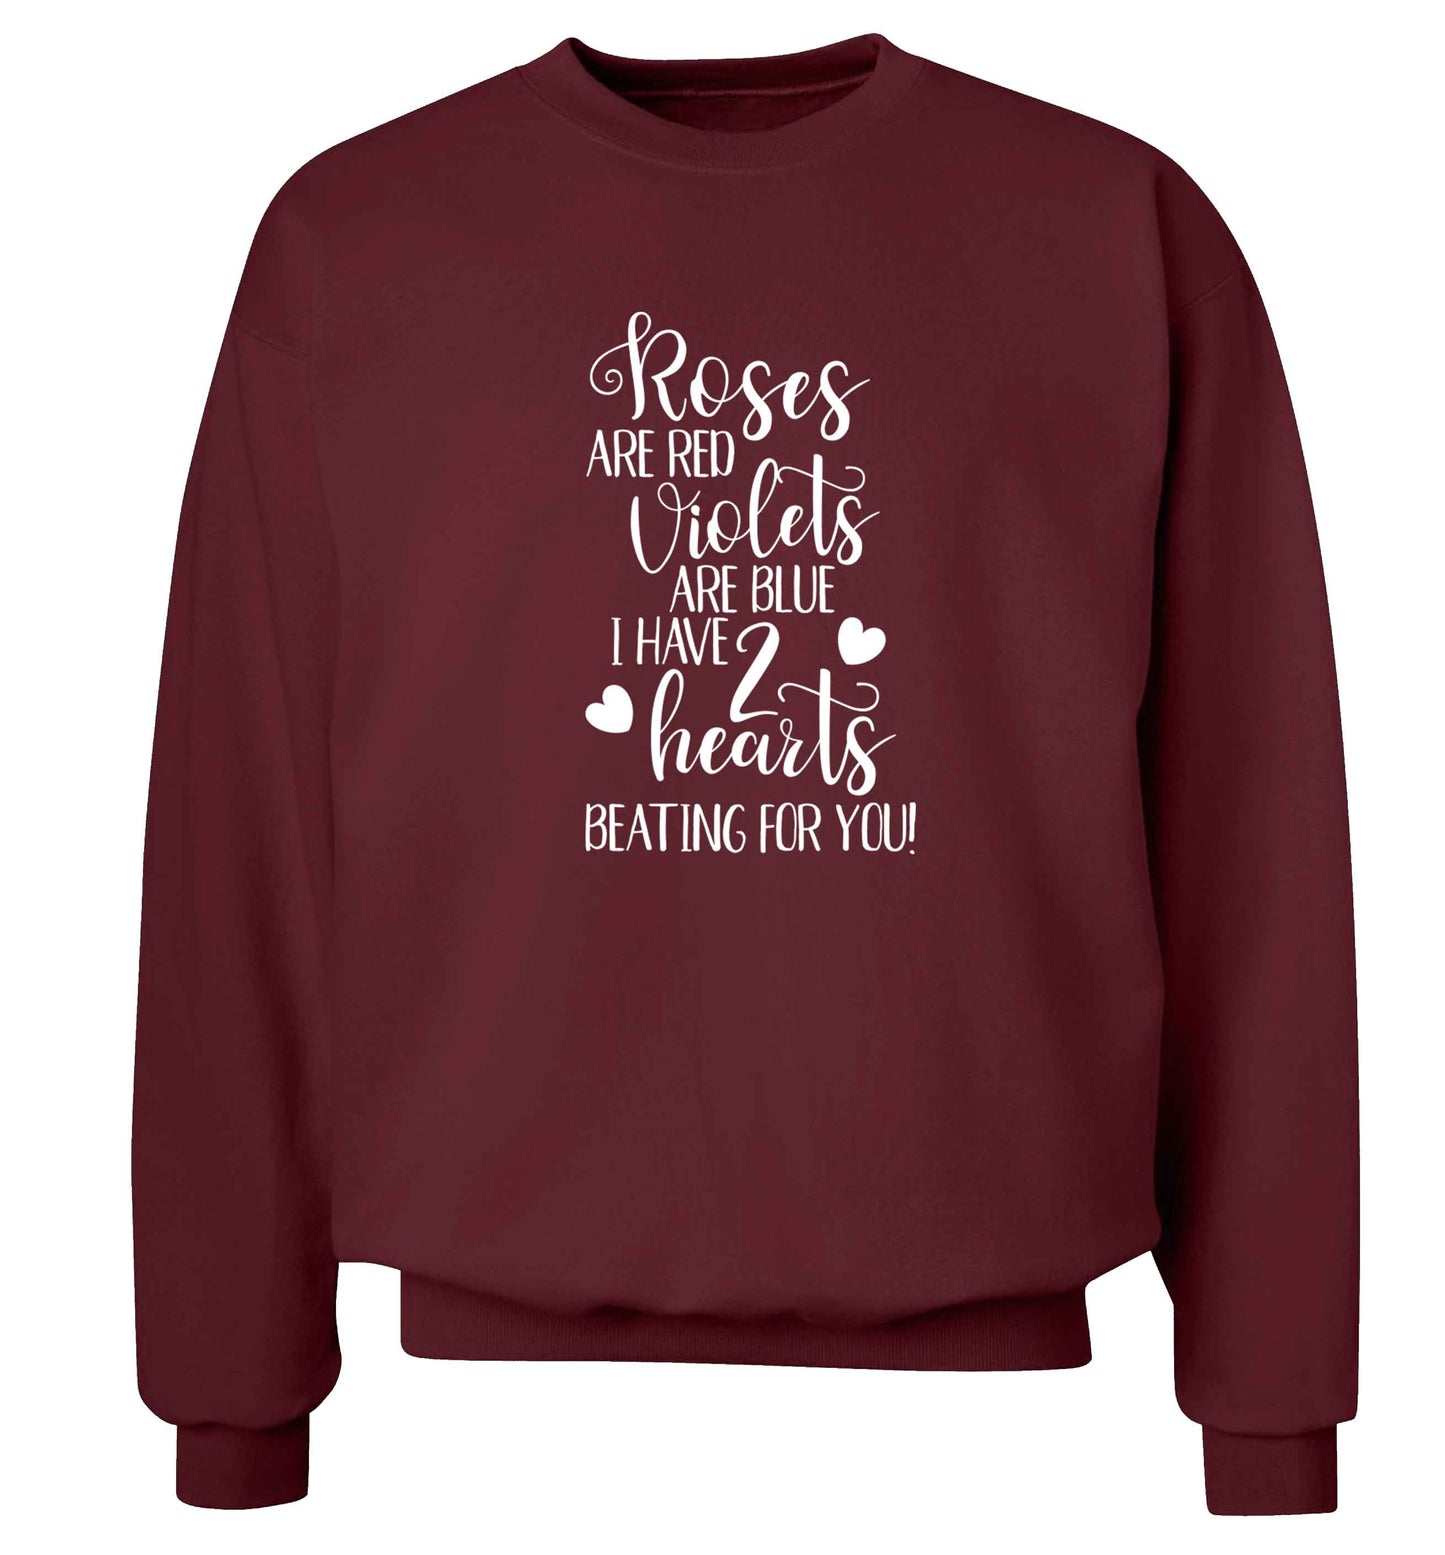 Roses are red violets are blue I have two hearts beating for you Adult's unisex maroon Sweater 2XL